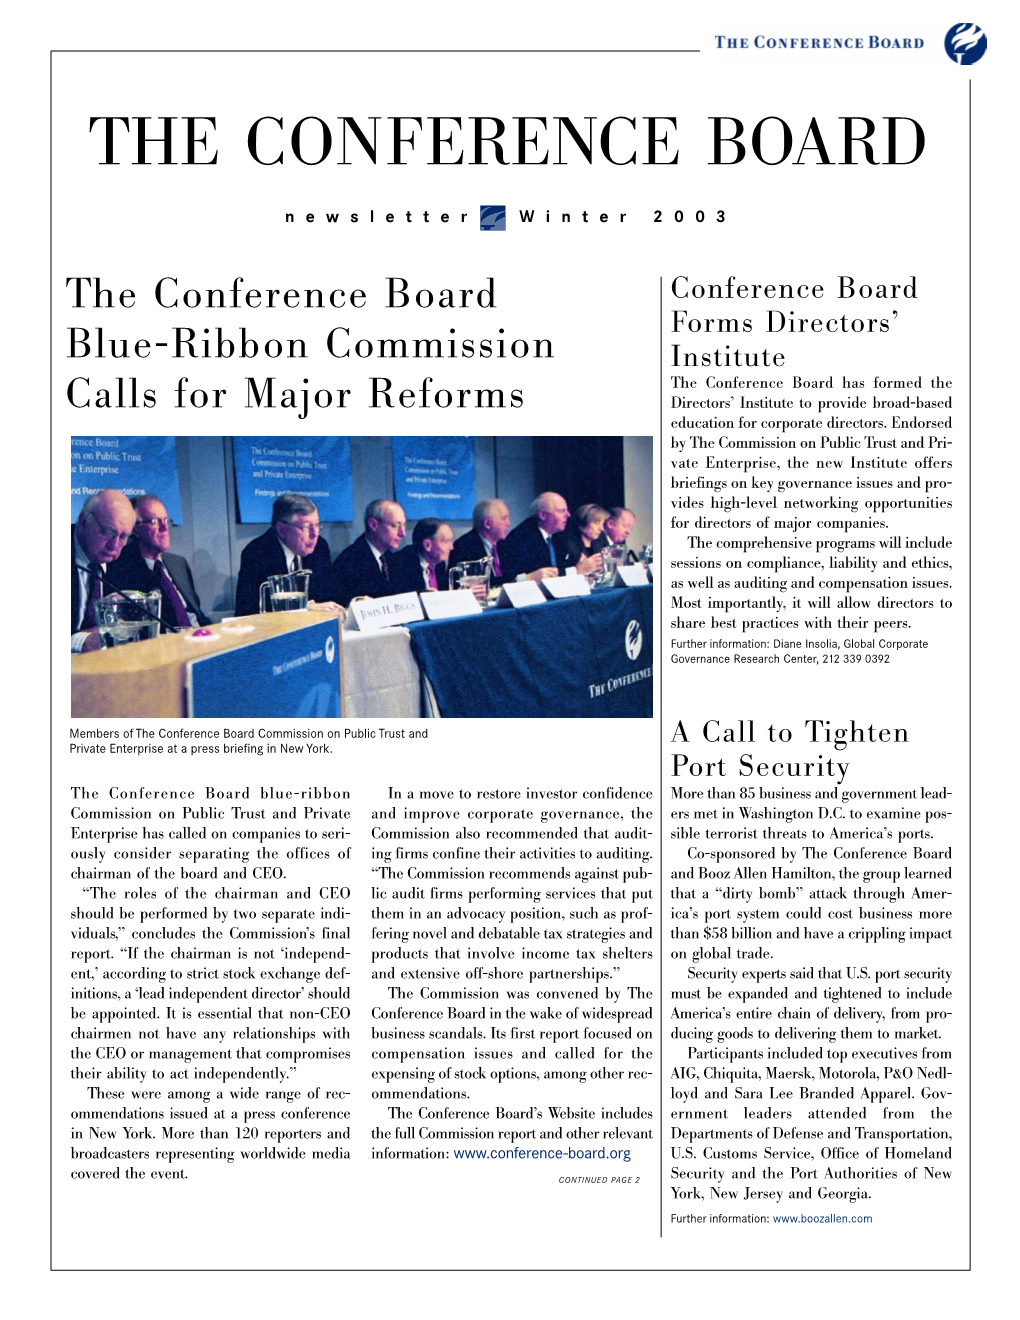 The Conference Board Newsletter Is Written and Edited by Randall Poe, Carol Courter, and Sandra Lester